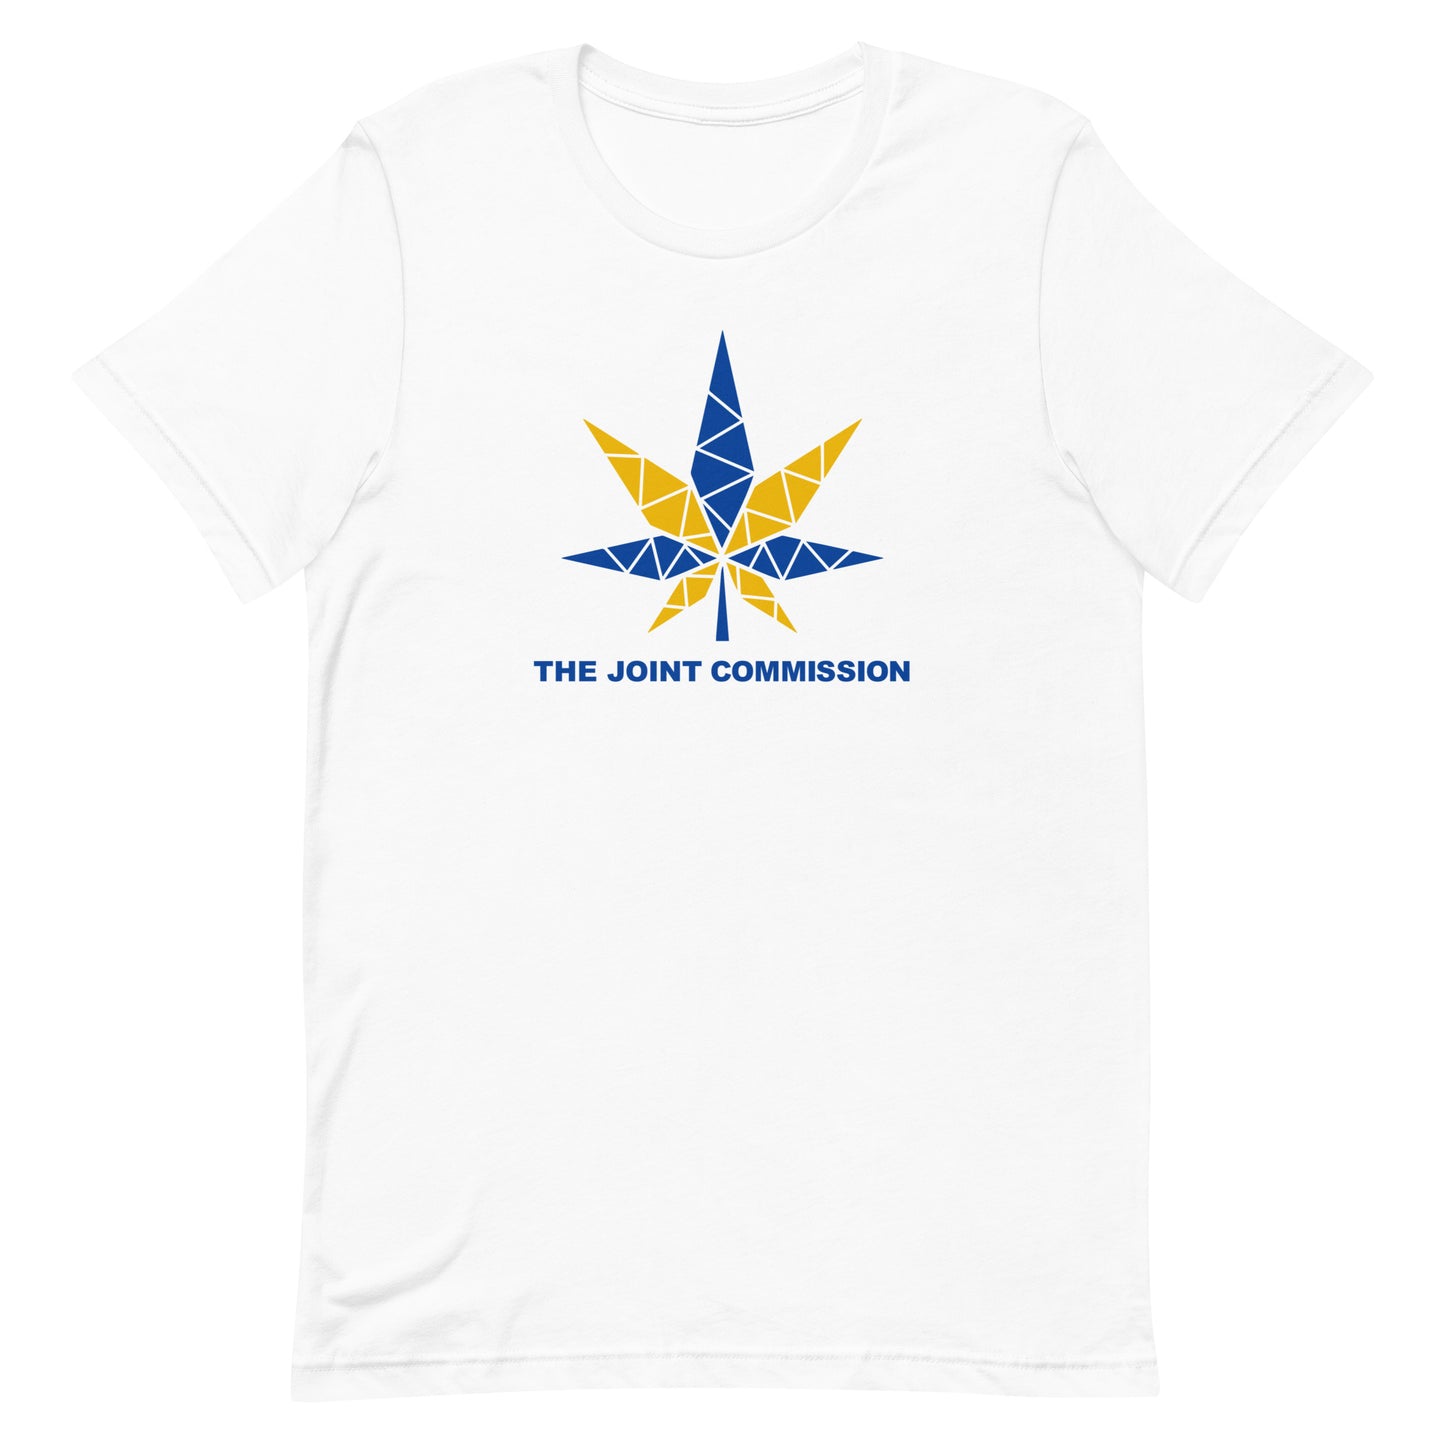 The Joint Commission Tee